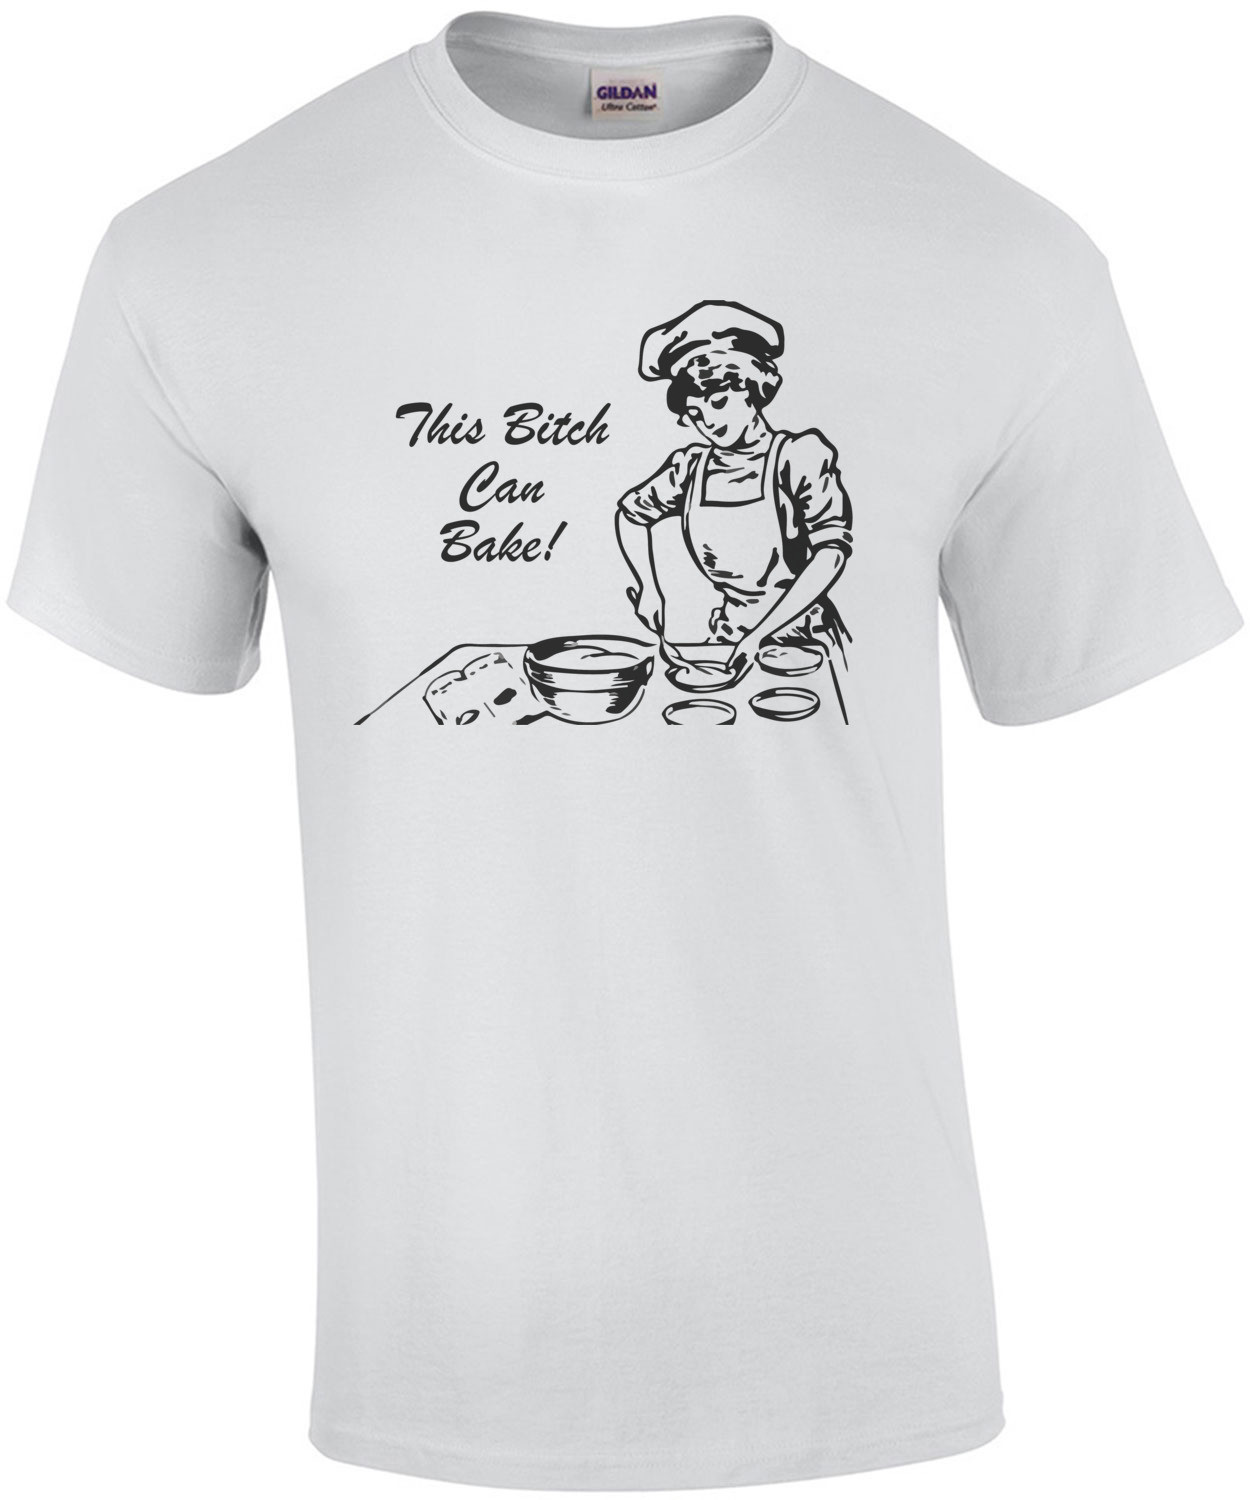 This bitch can bake - T-Shirt